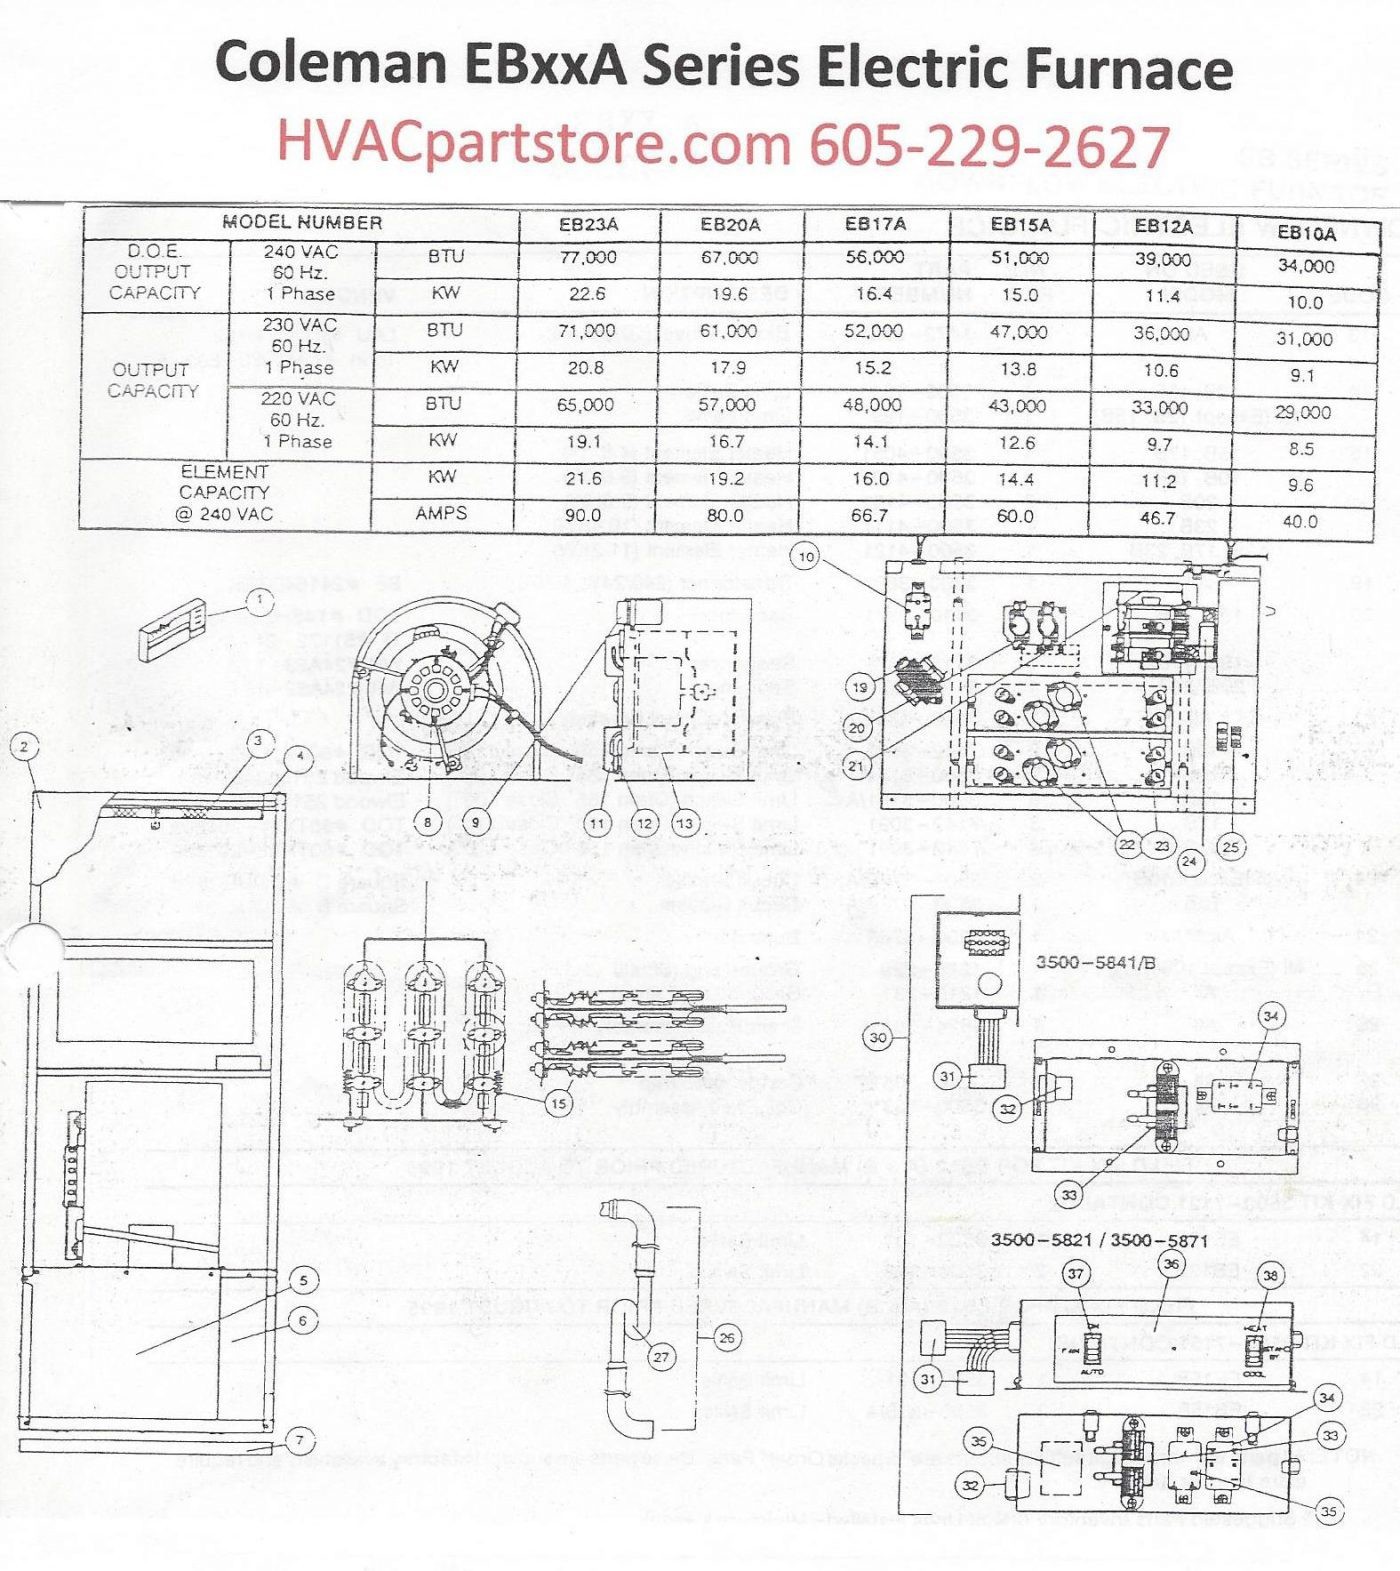 Duo therm Rv Air Conditioner Wiring Diagram Fresh Duo therm thermostat Wiring Diagram Diagram Of Duo therm Rv Air Conditioner Wiring Diagram